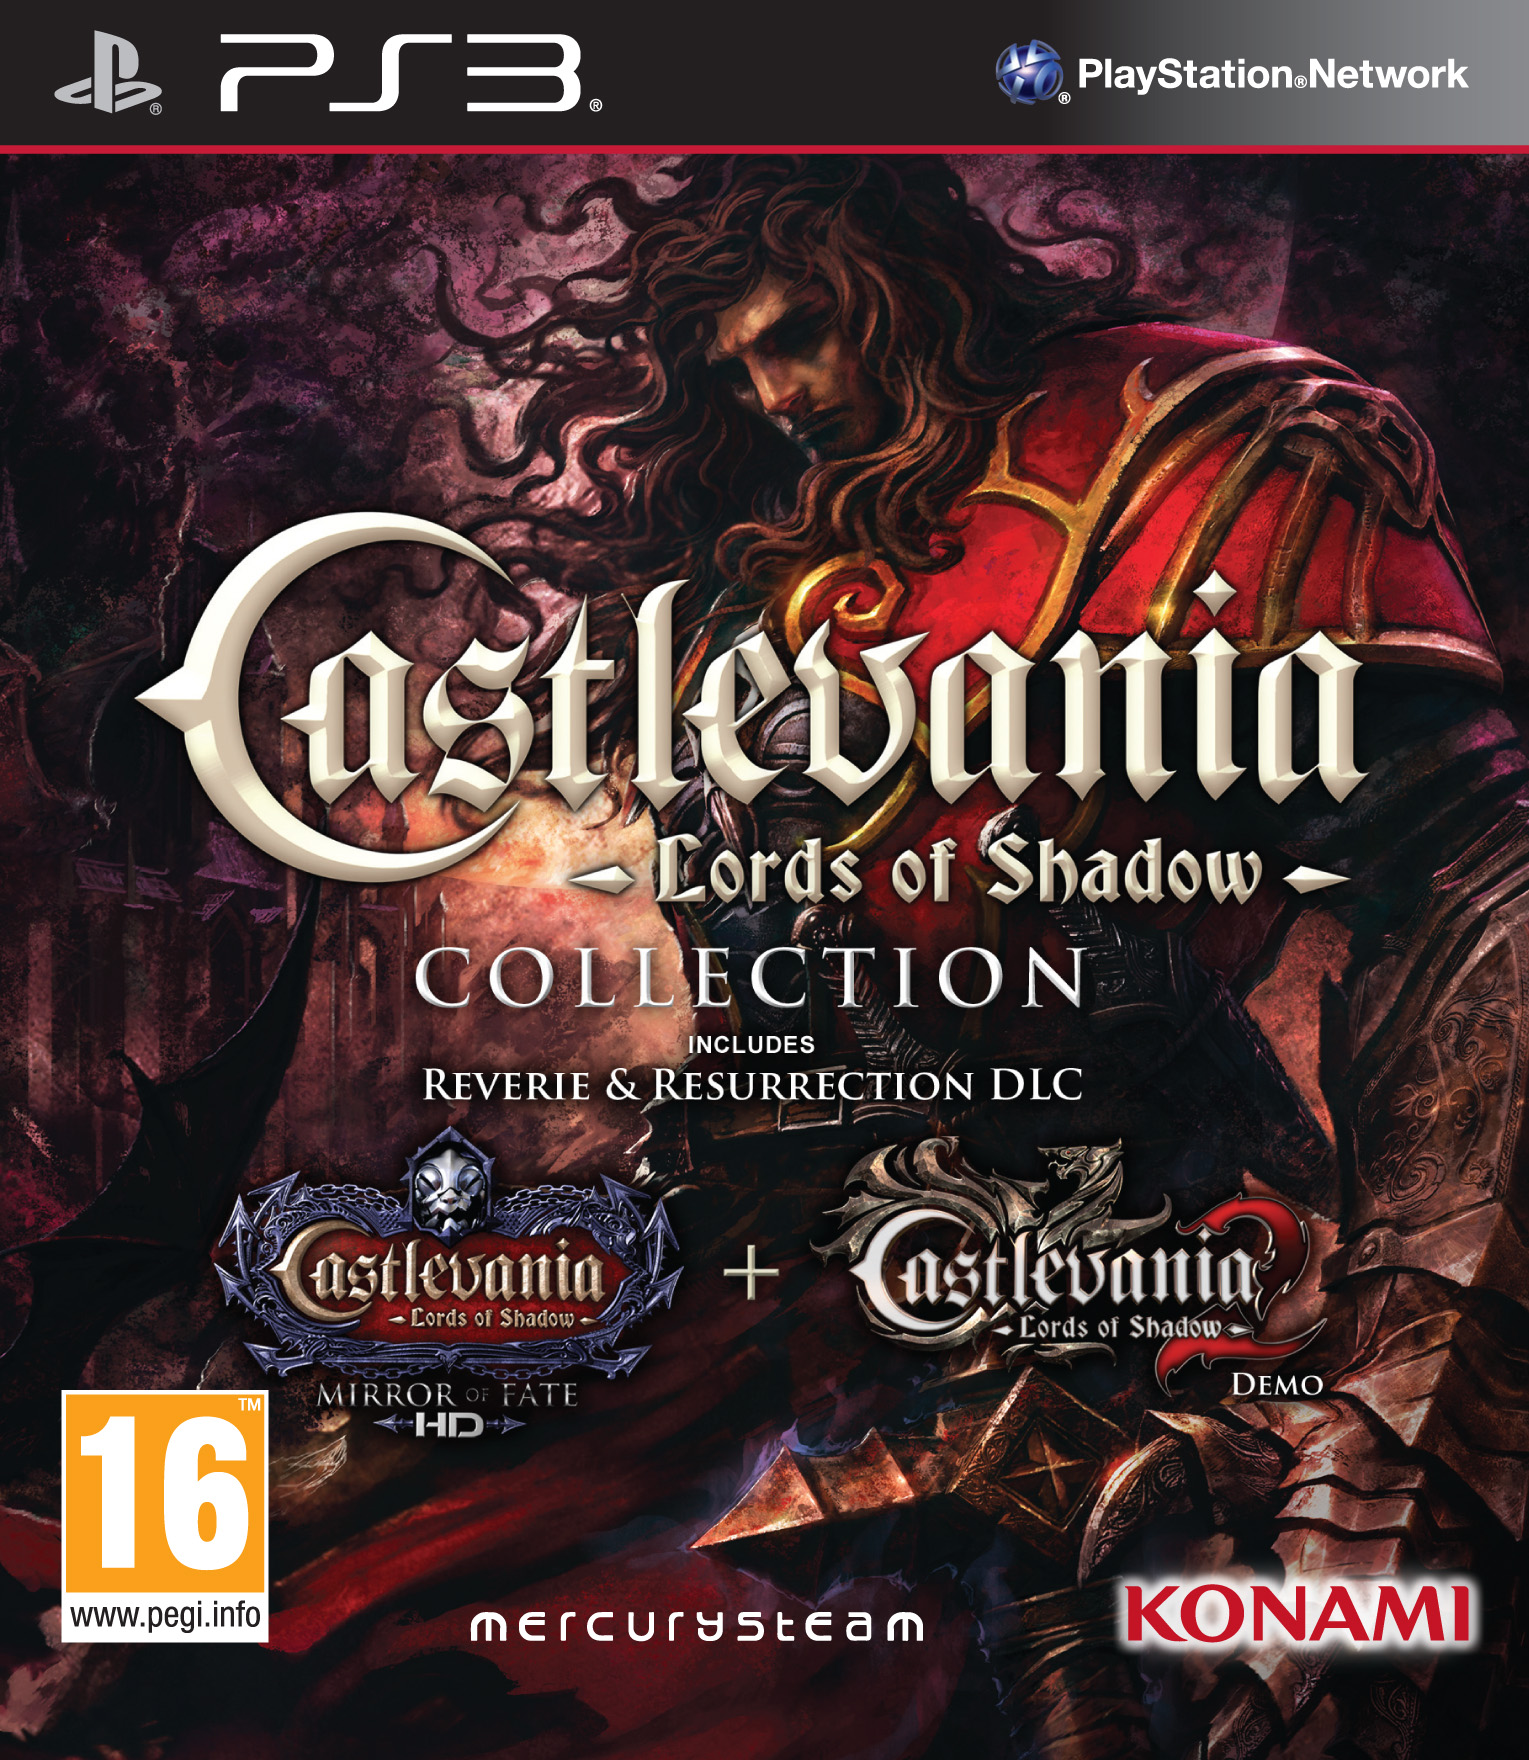 Castlevania: Lords of Shadow - The Collection